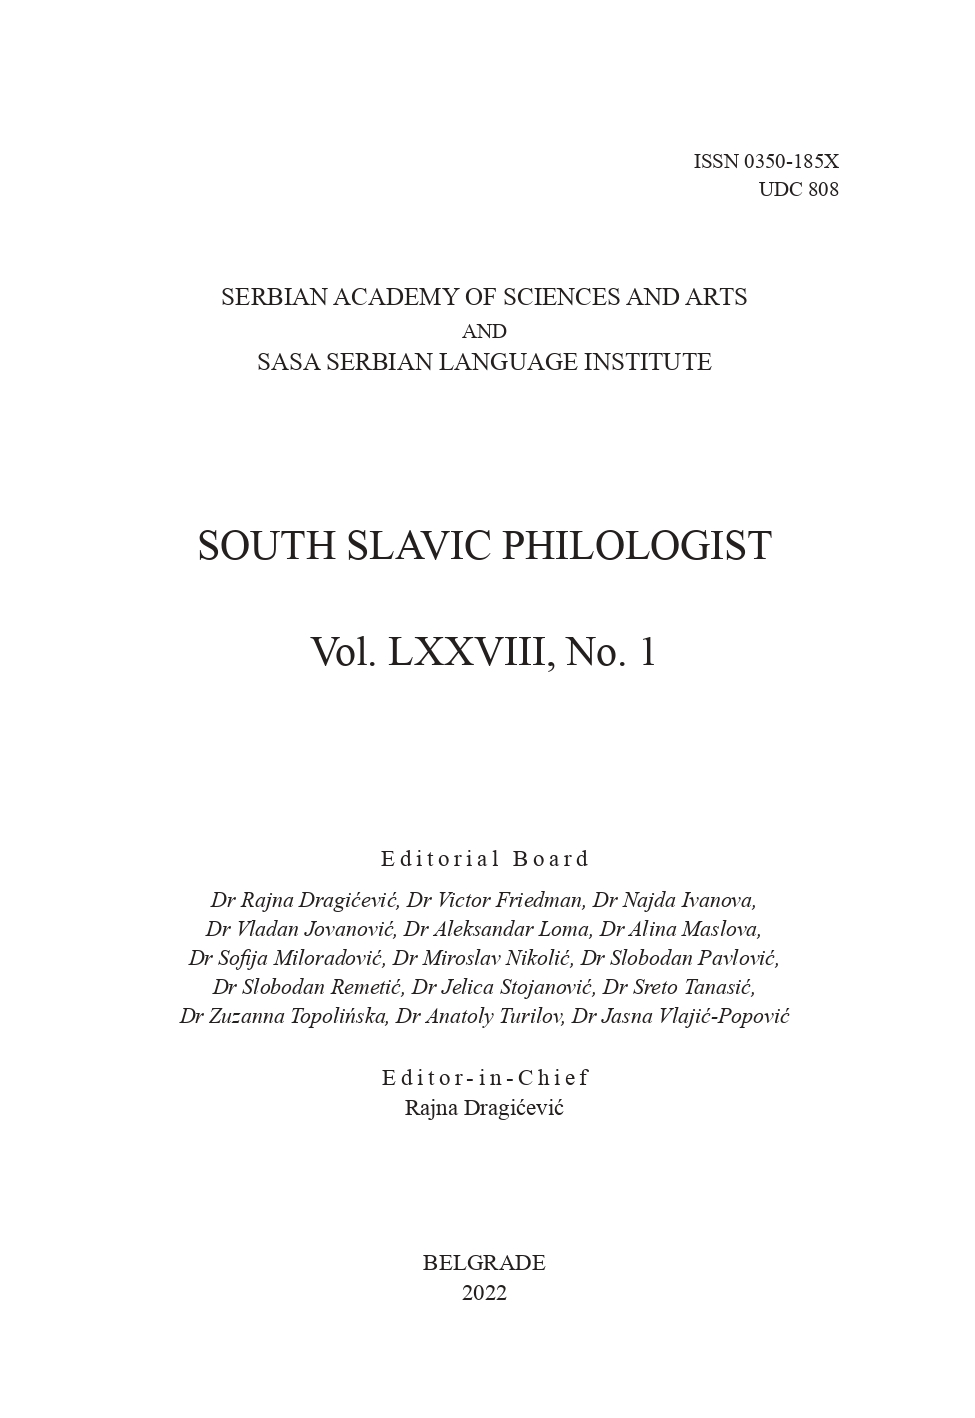 Scientific meeting Current issues of lexicology and lexicography of the Serbian language. Andrić Institute. Andrićgrad, 8–10 October 2021 Cover Image